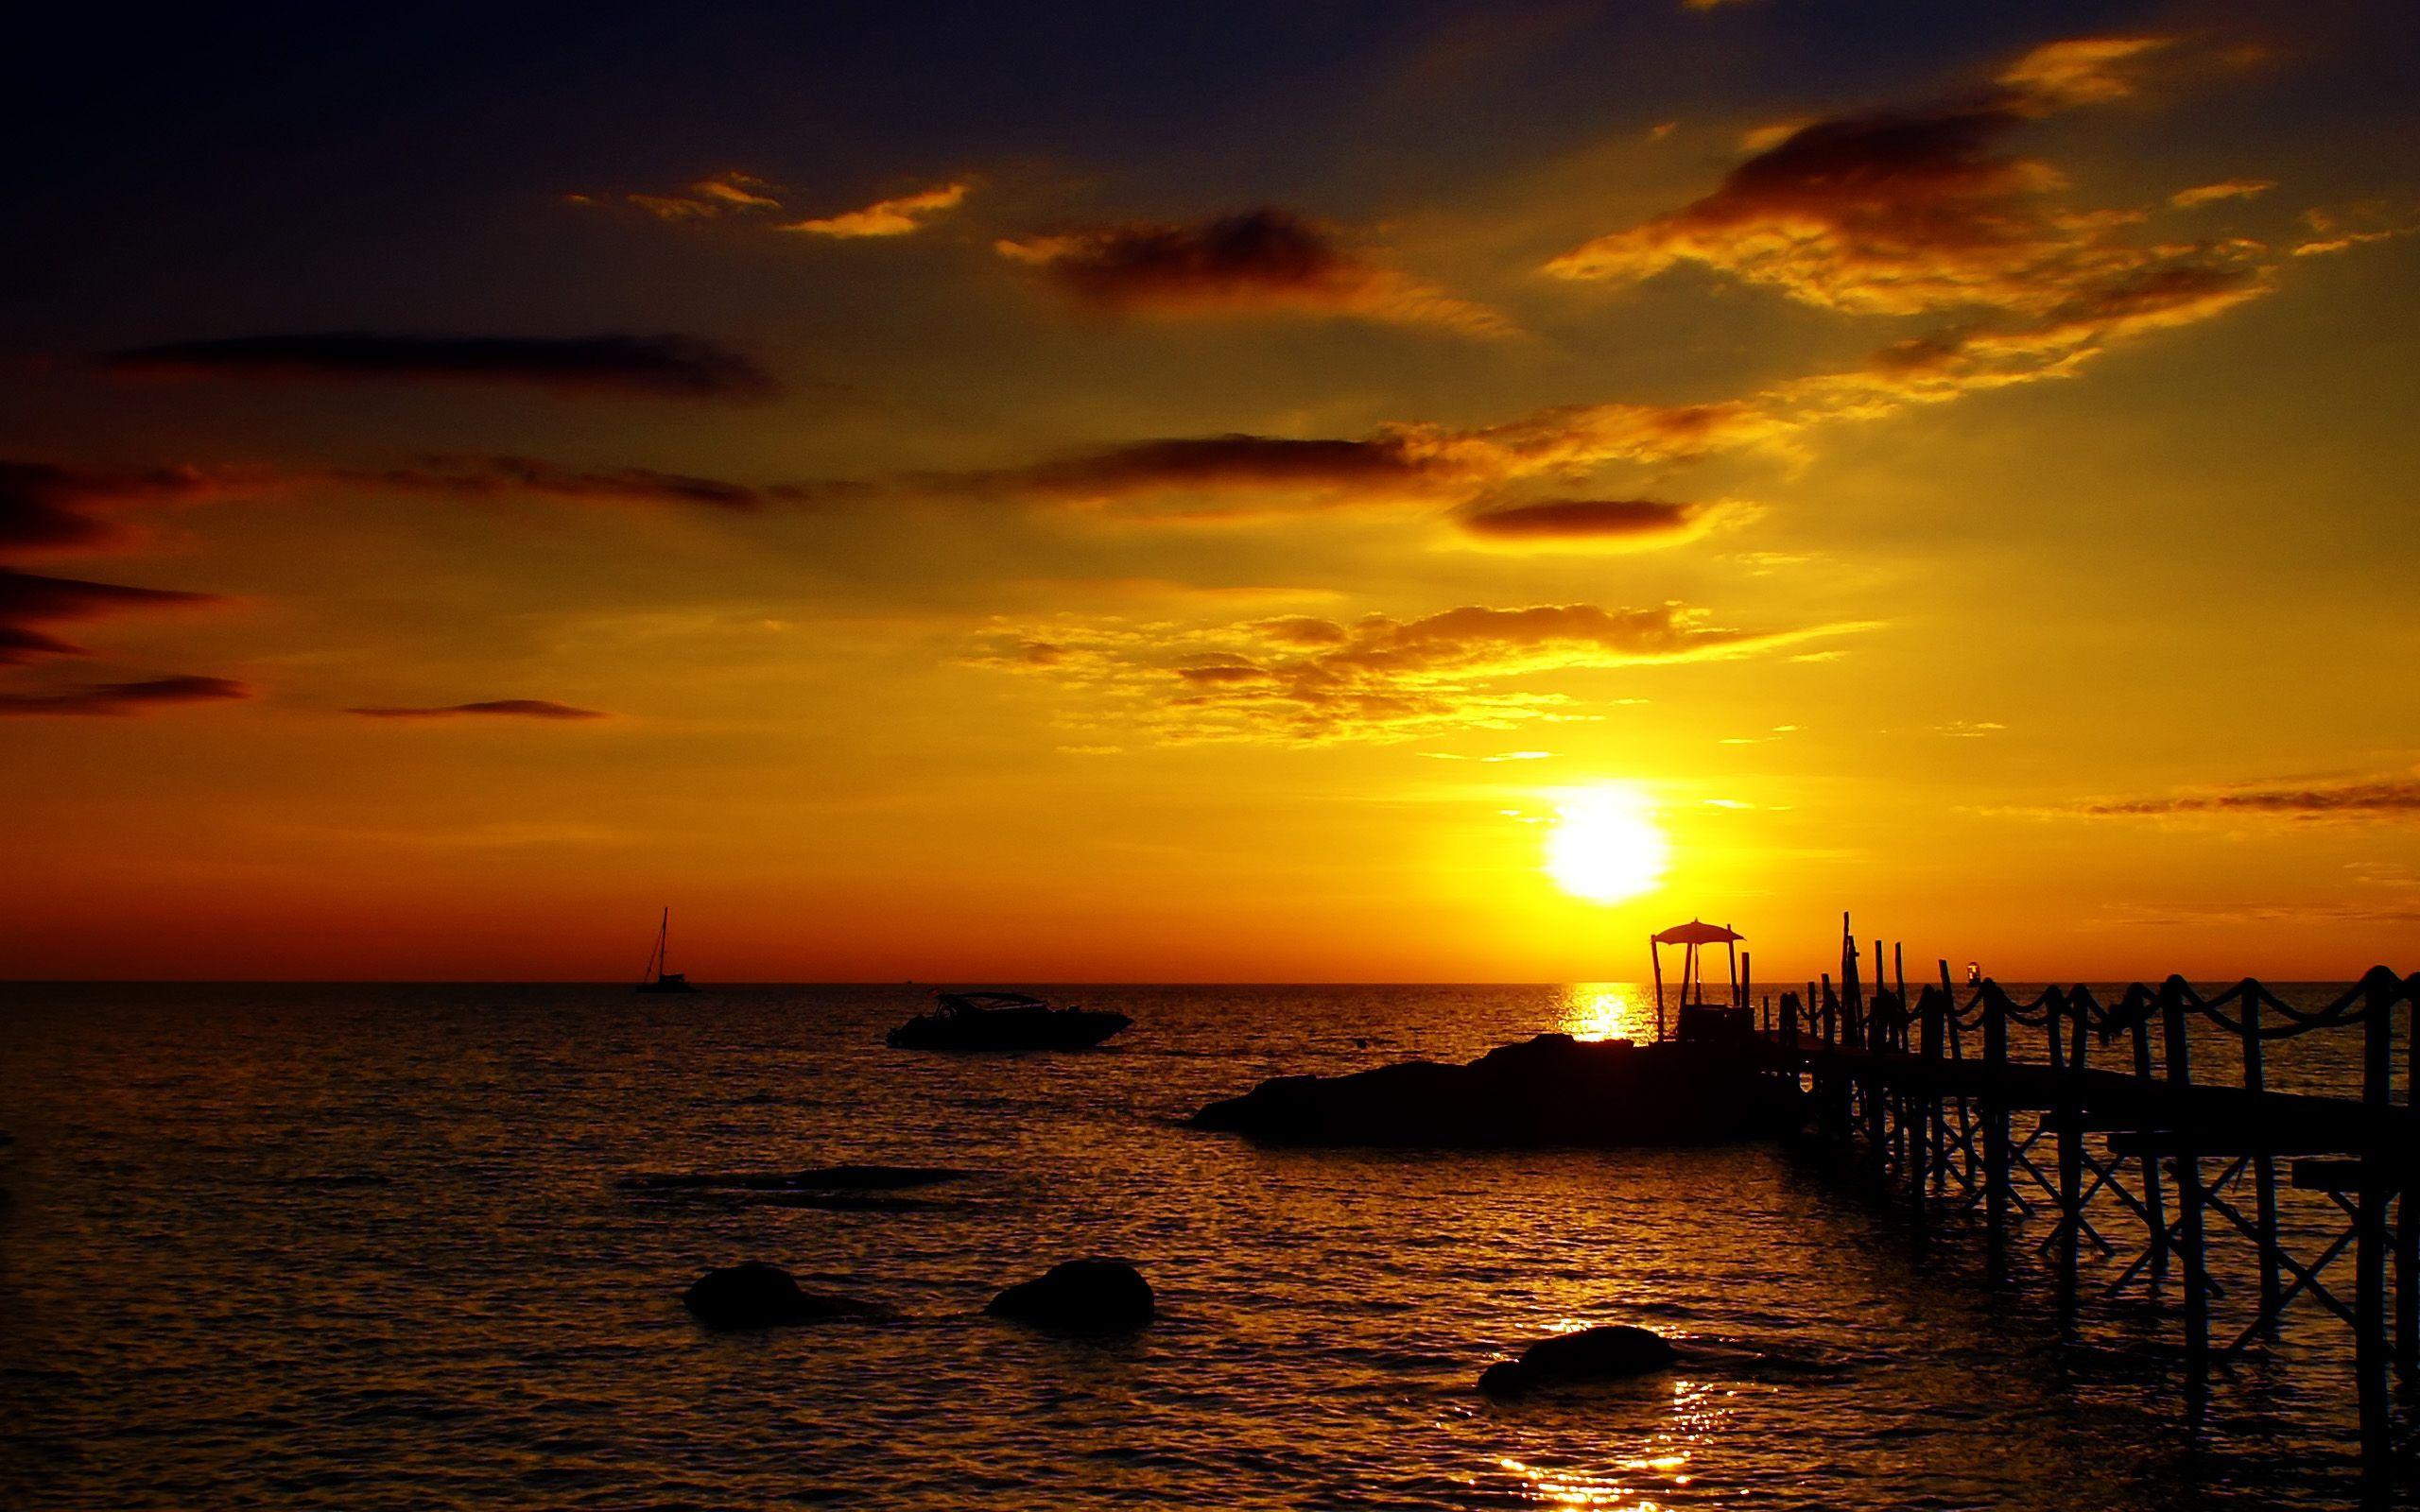 gold sunset. Golden sunset Wallpaper Picture Photo Image. We